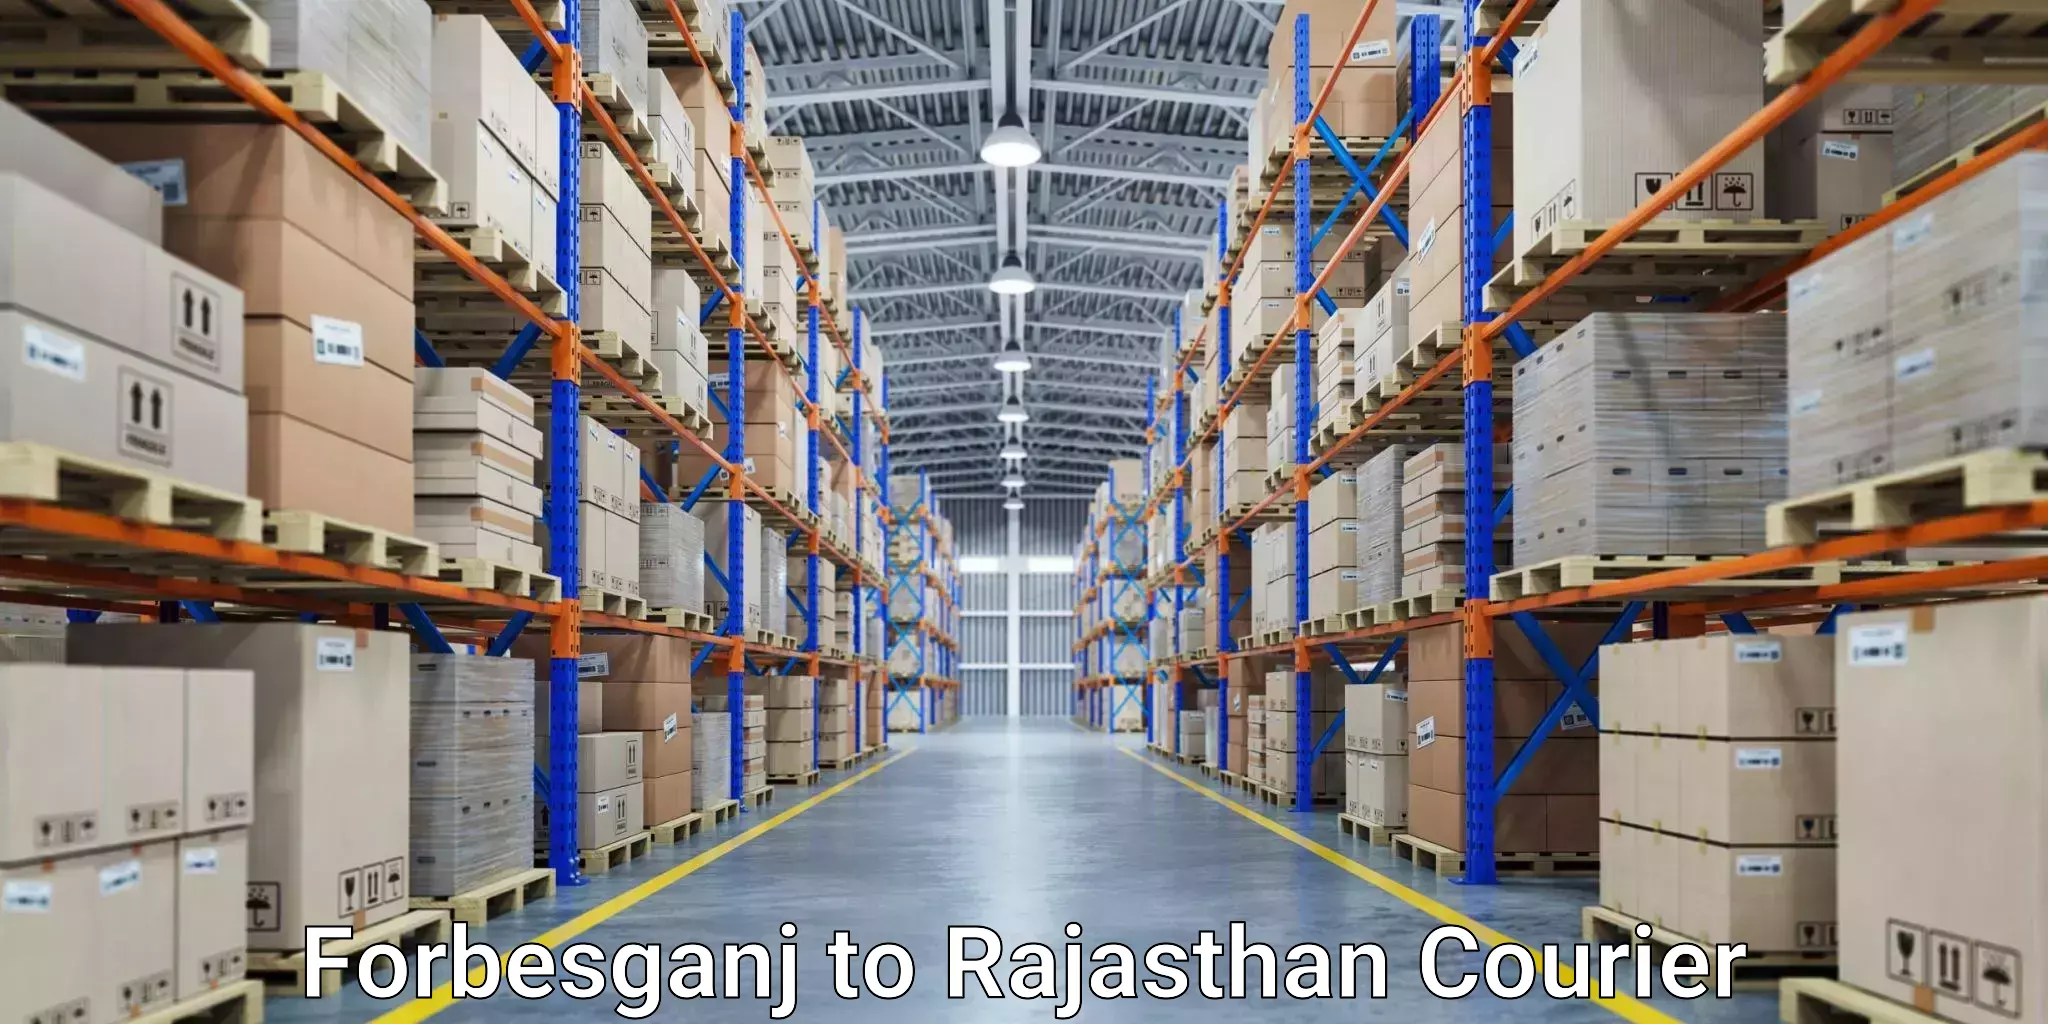 On-call courier service Forbesganj to Rajasthan